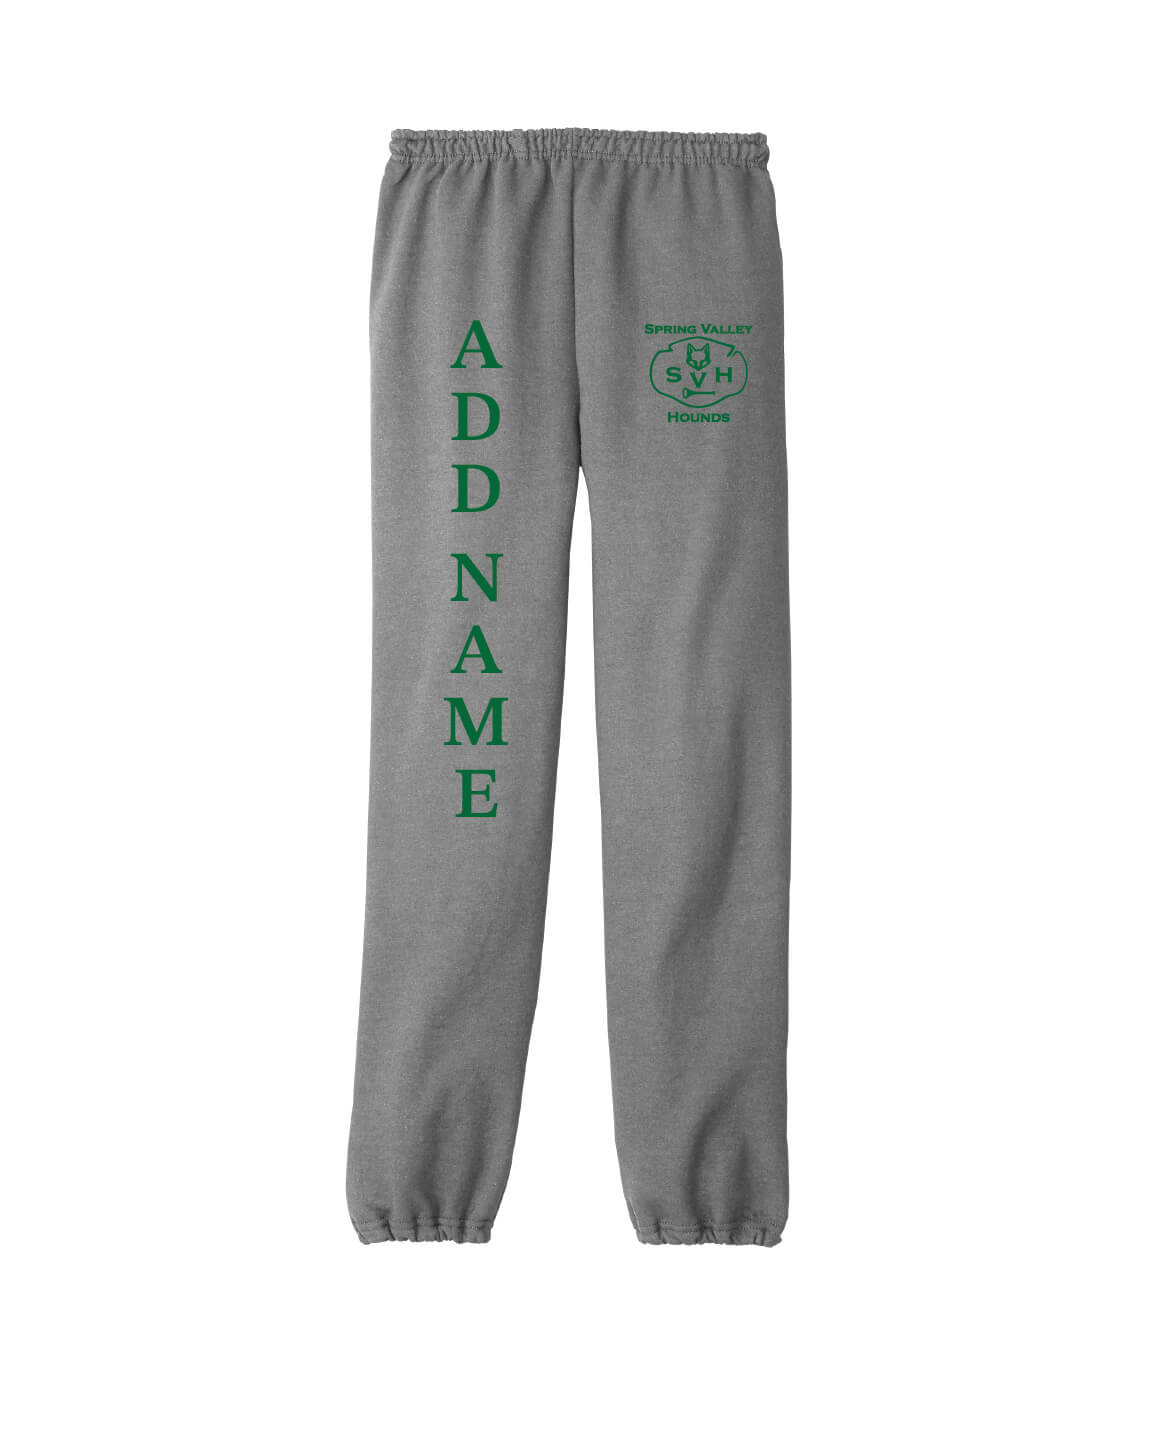 Sweatpants (Youth) Hounds gray